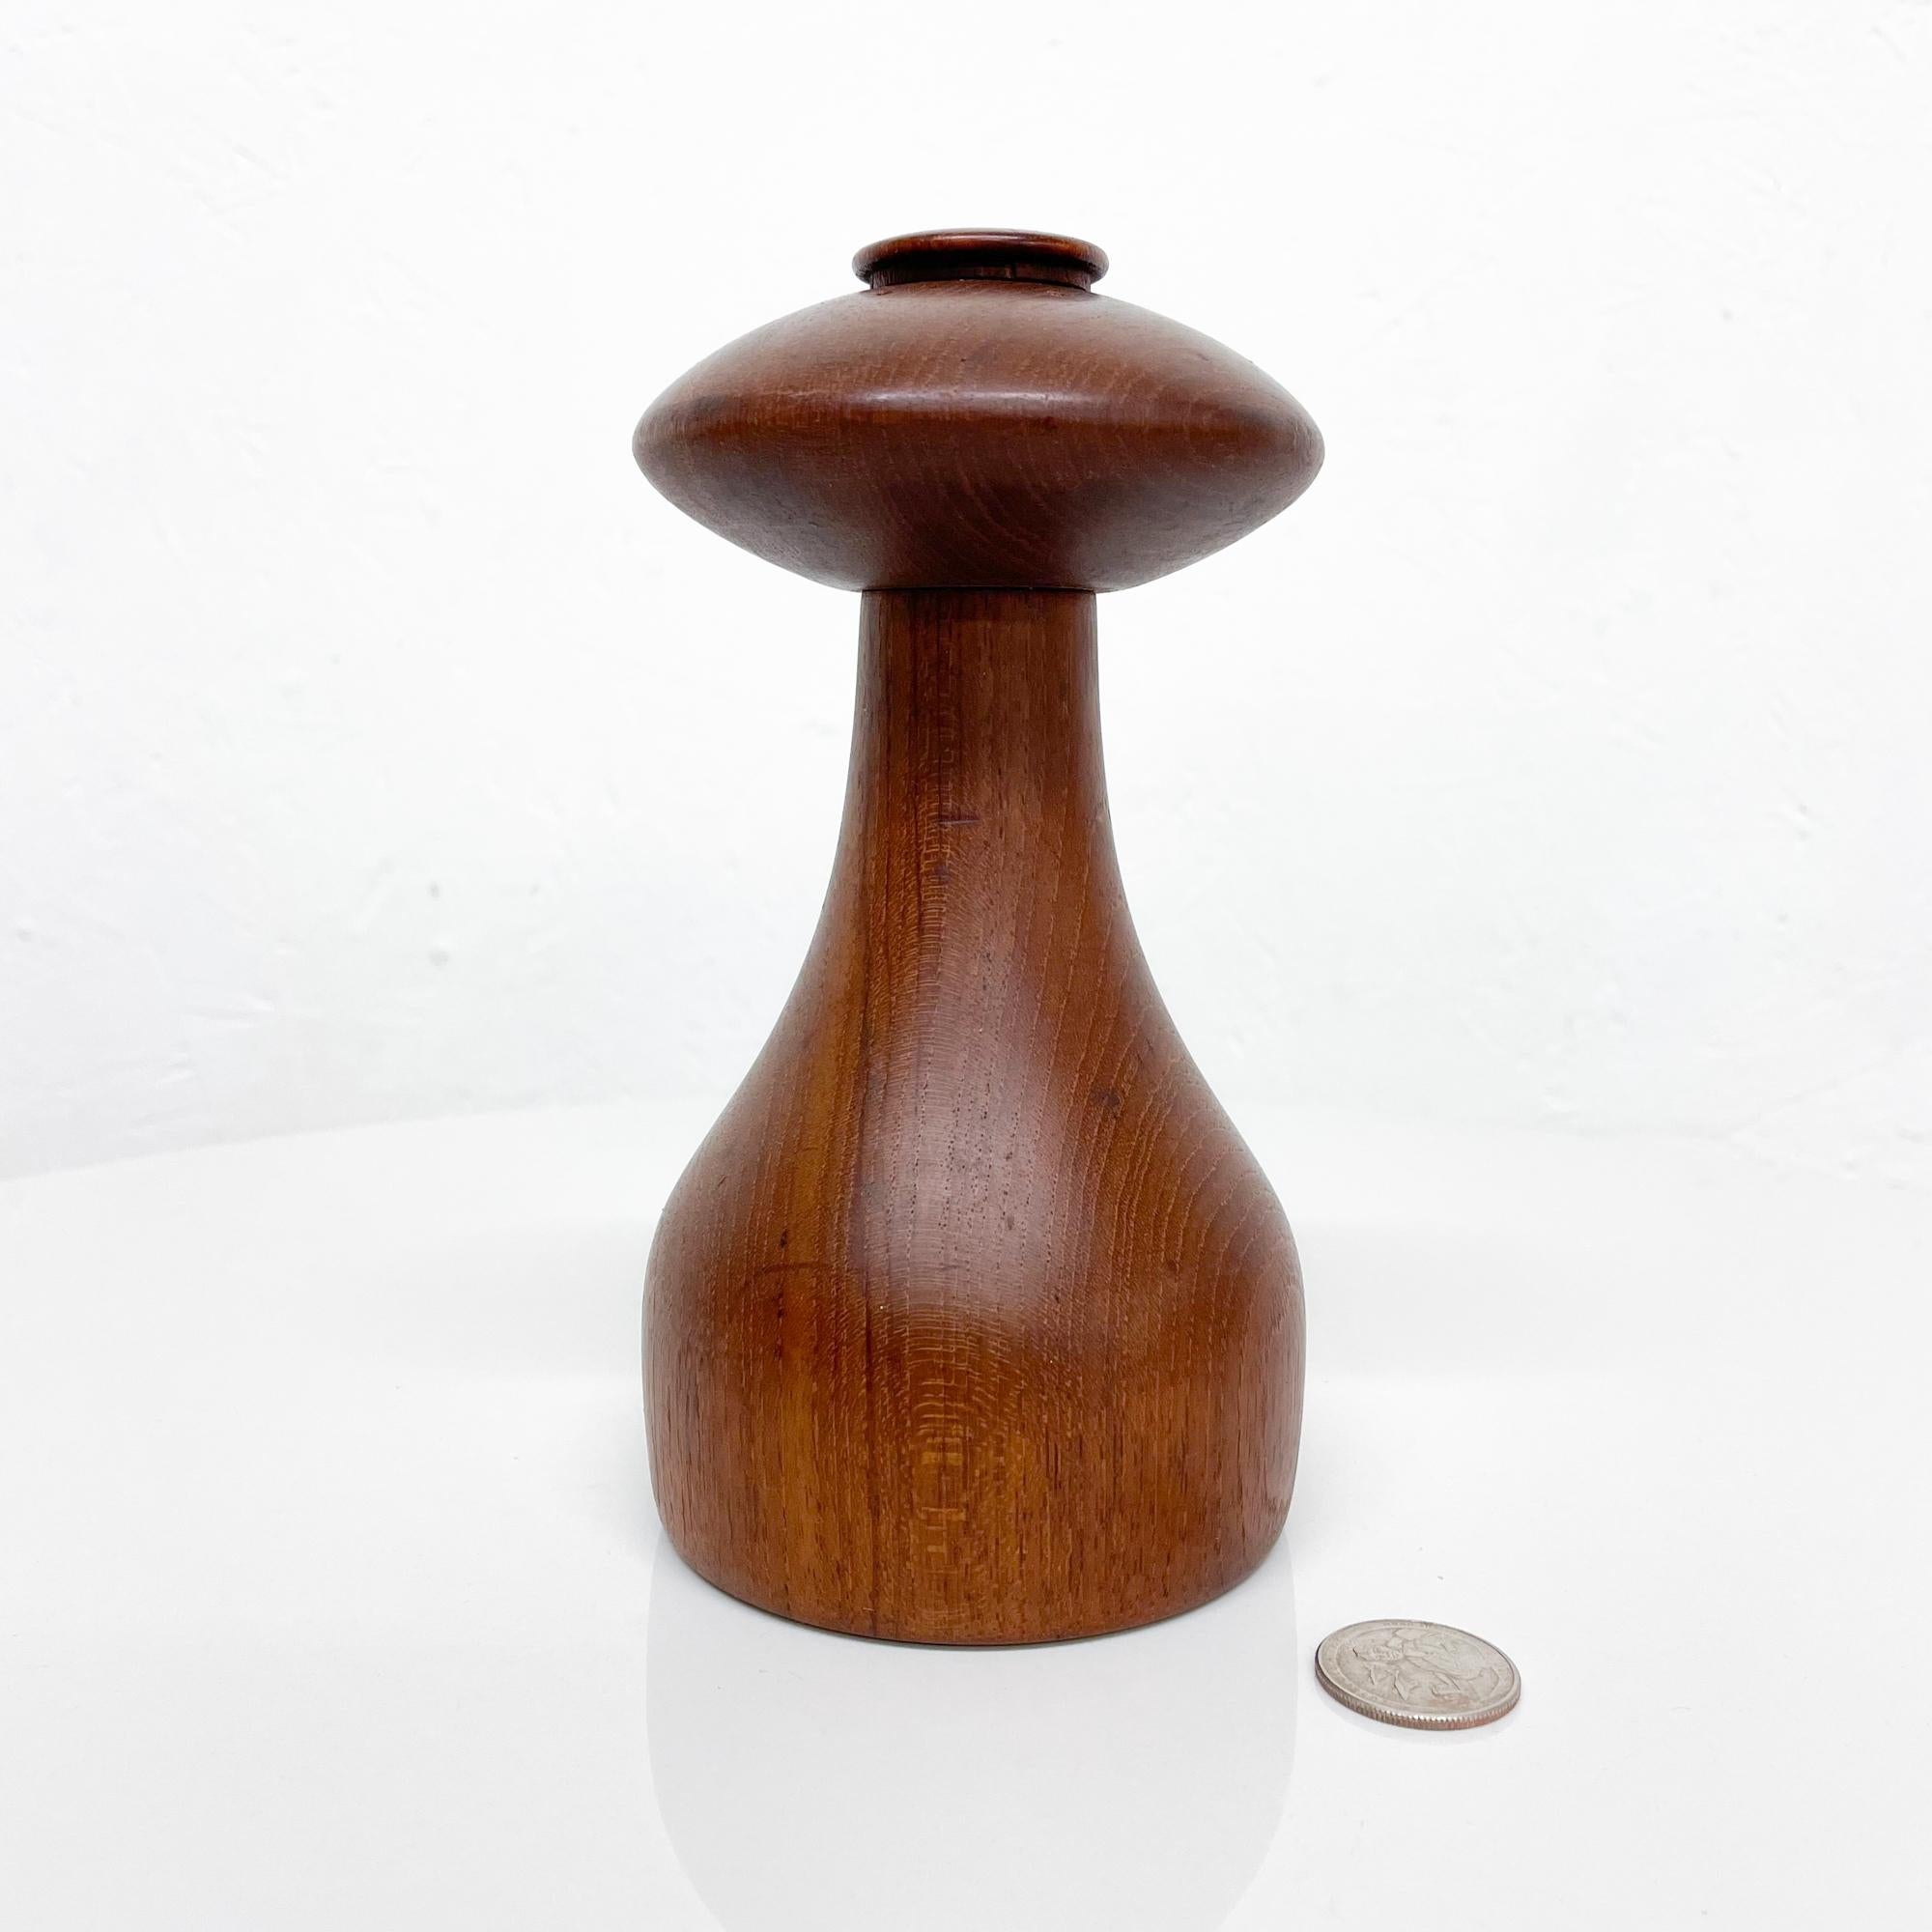 For your consideration a vintage Danish modern teak pepper mill or shaker designed by Jens Quistgaard for Dansk. 
Made in Denmark, circa late 1960s.
Sculptural shape in very good vintage unrestored condition. Great color with beautiful vintage